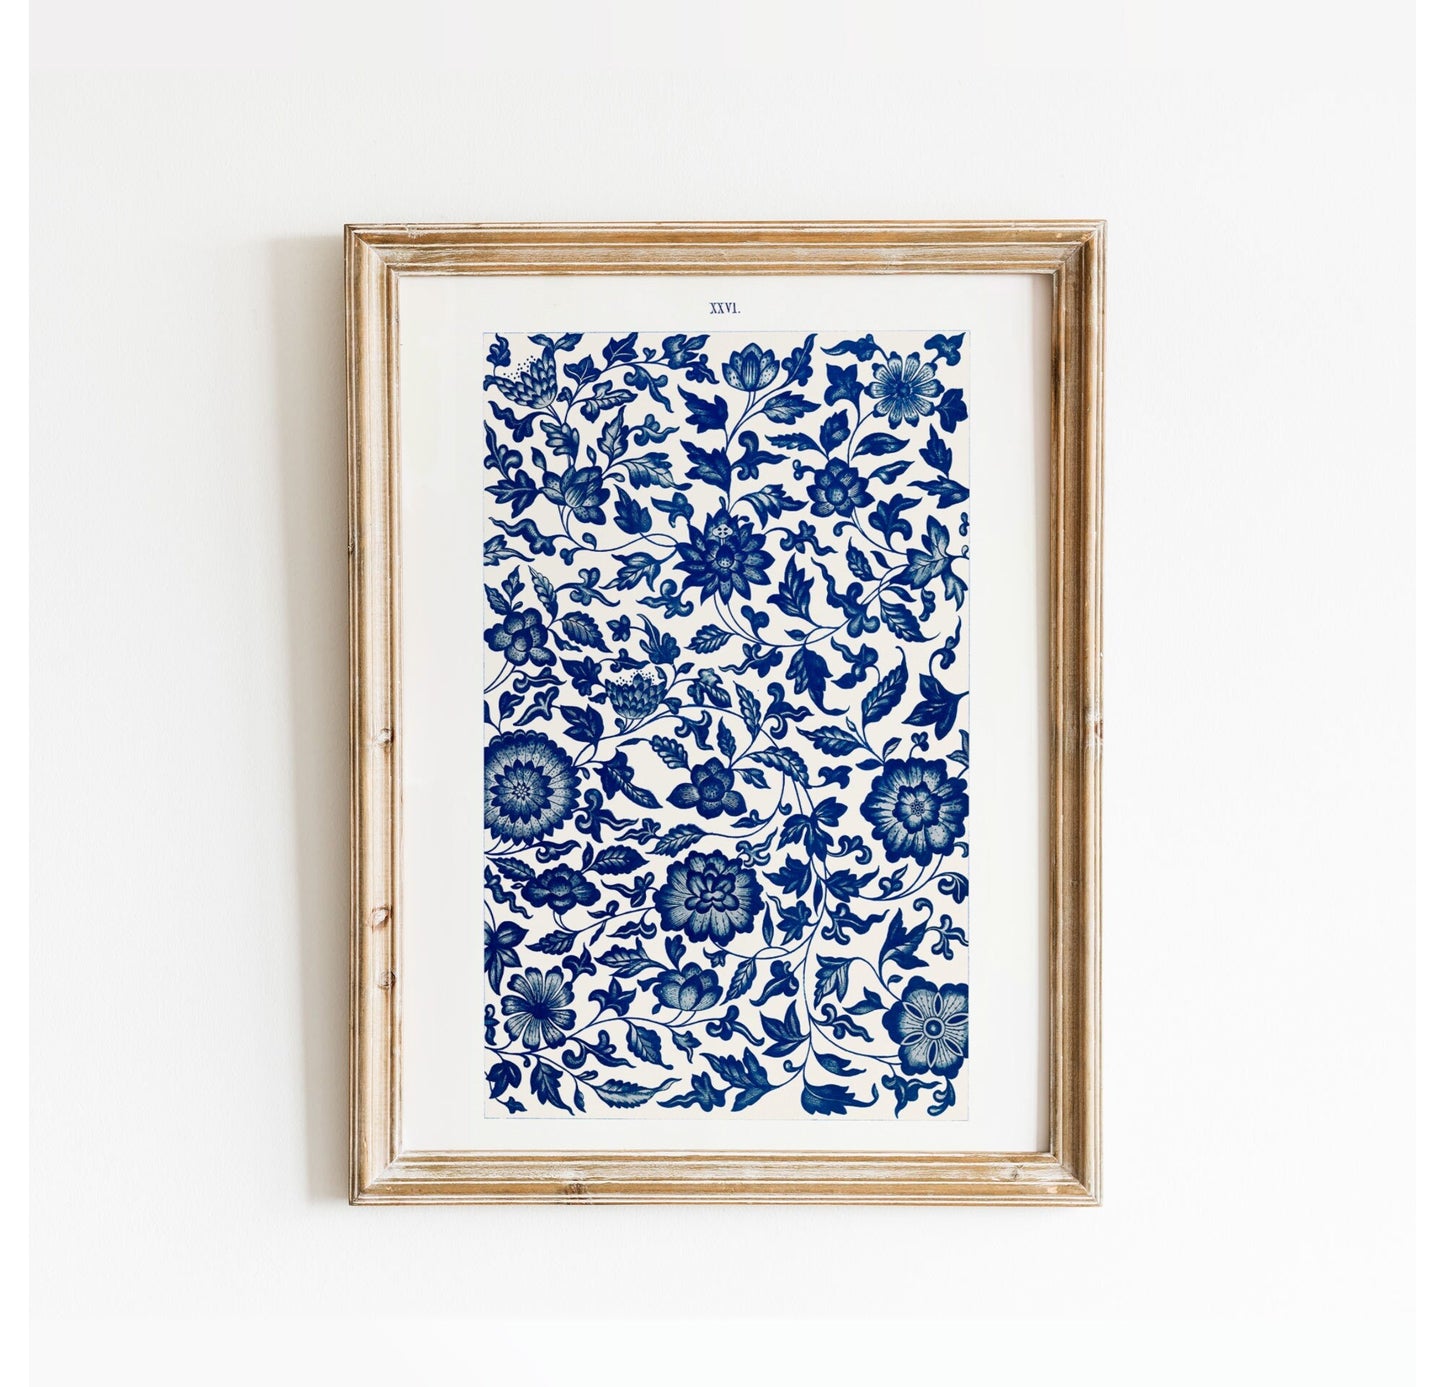 Vintage wallpaper patter in blue and white